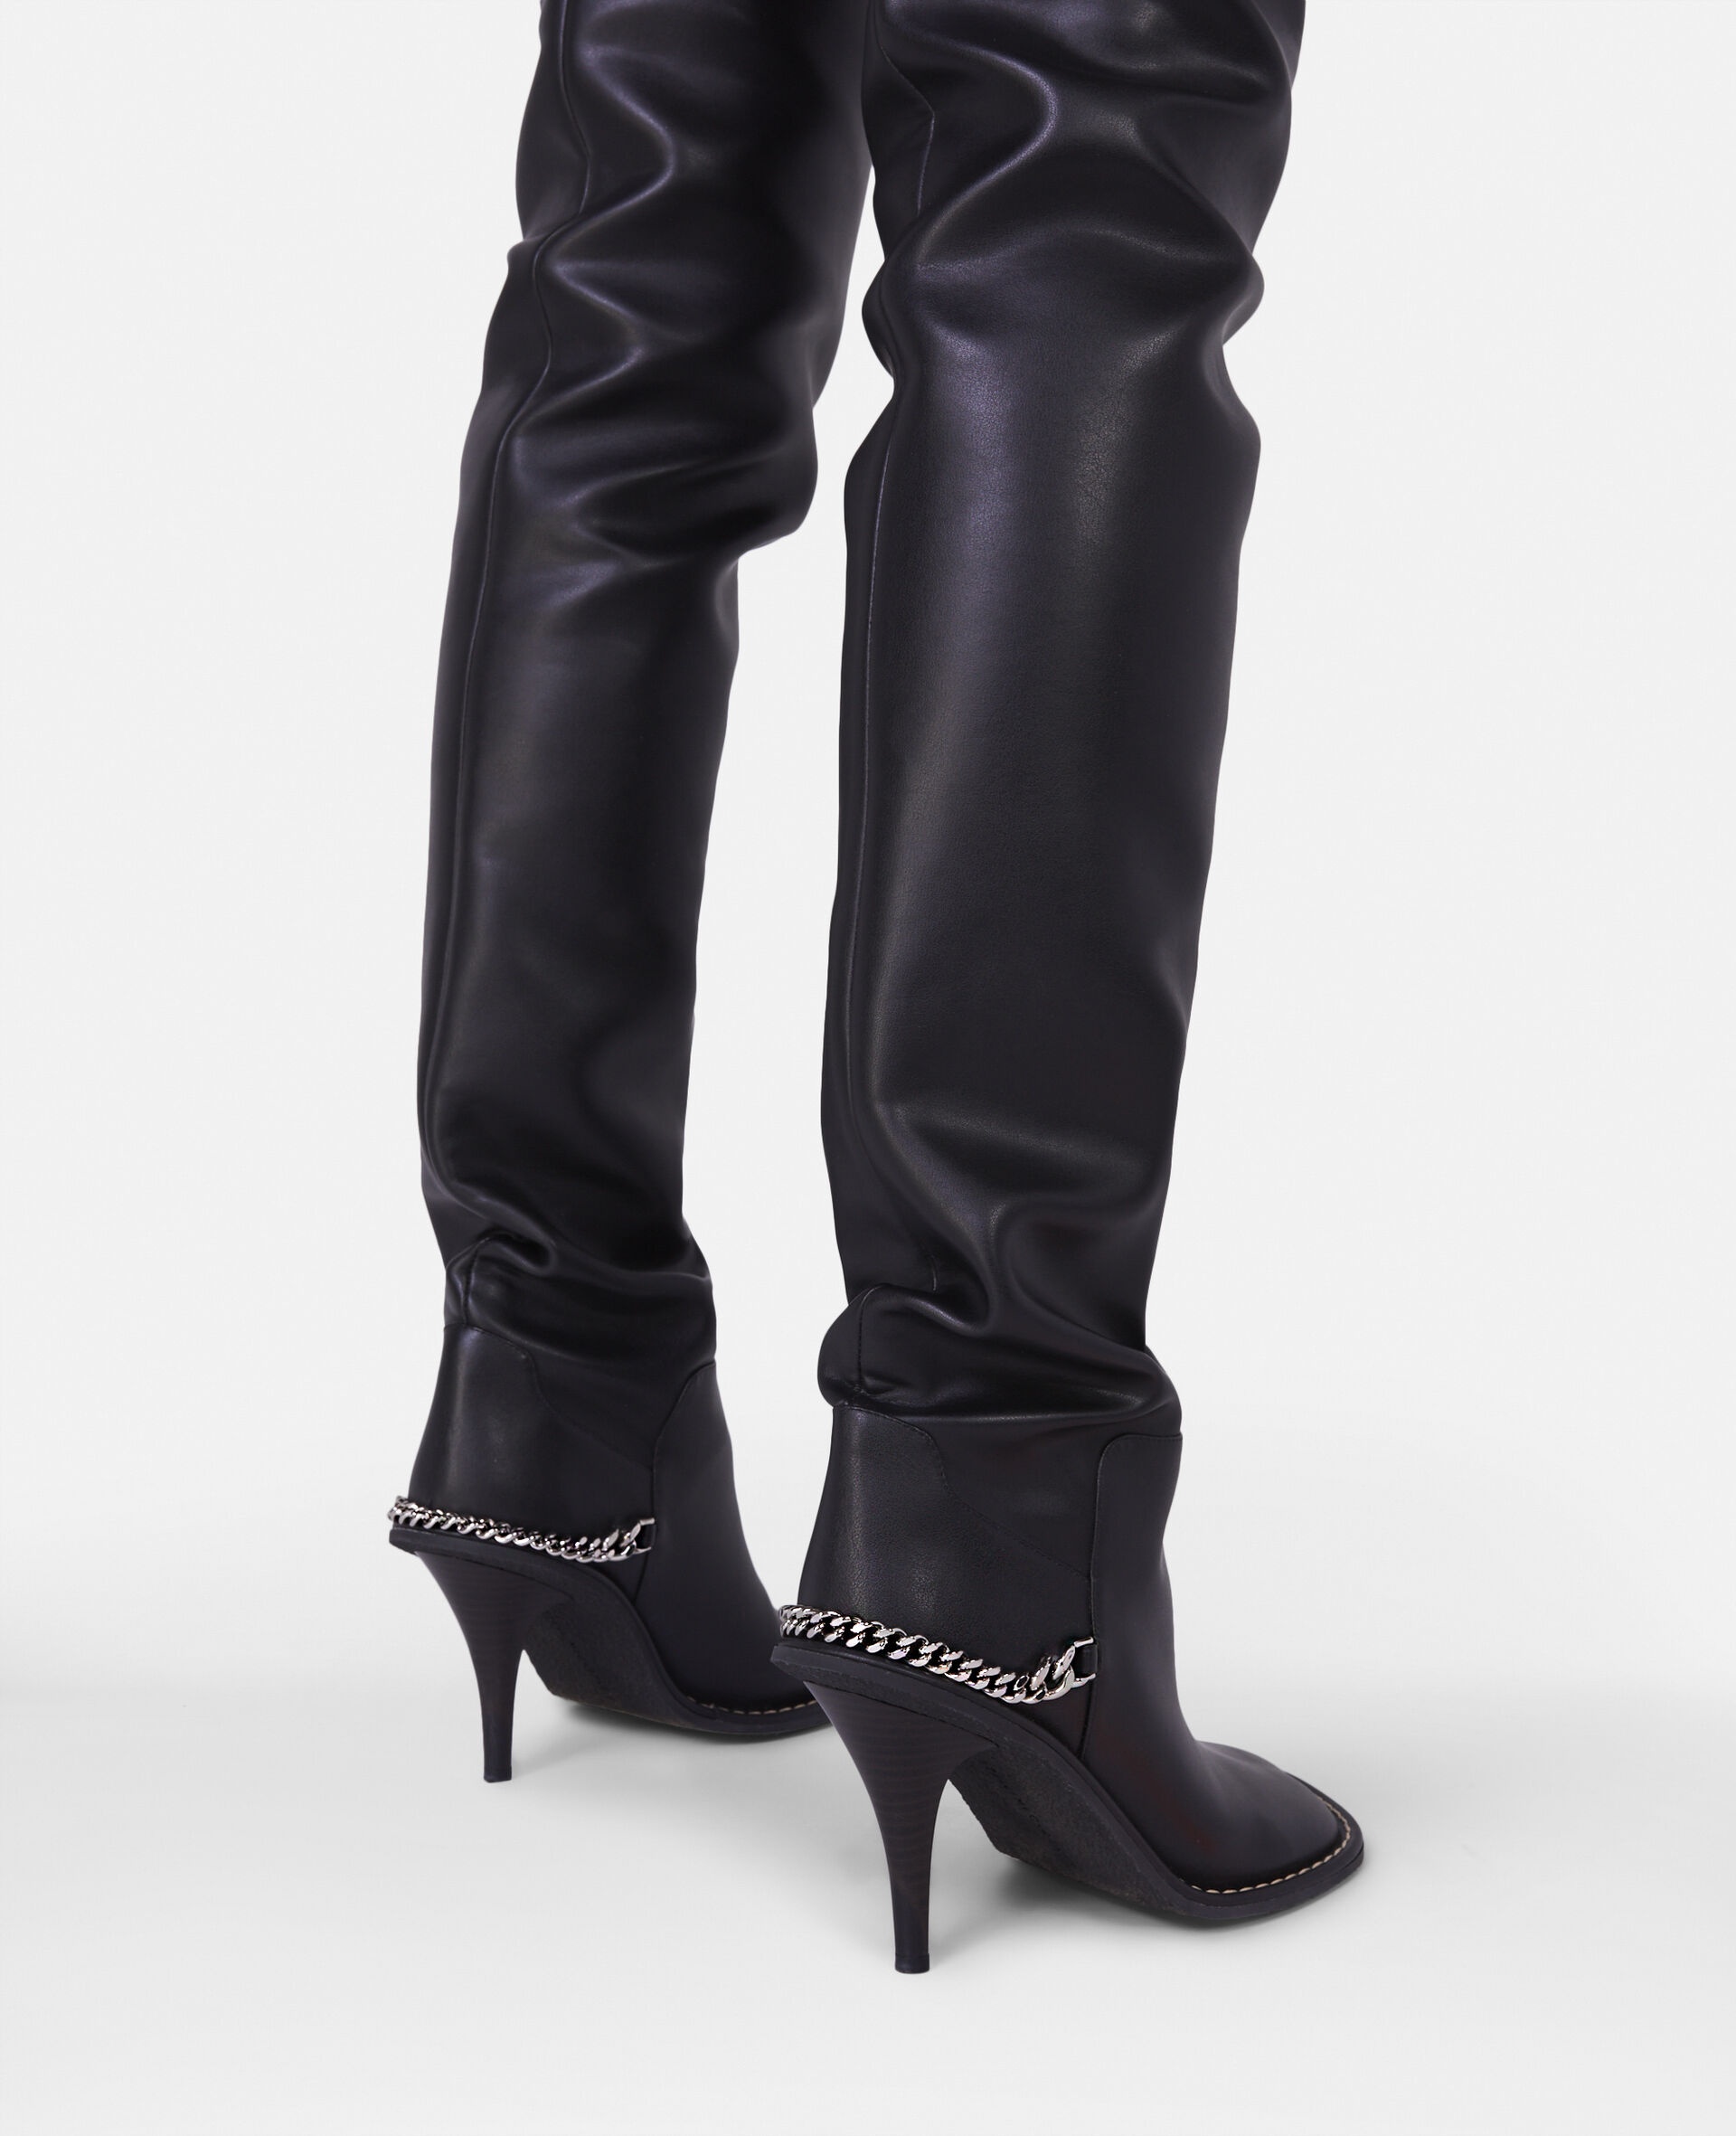 Ryder Above-the-Knee Stiletto Boots - 2